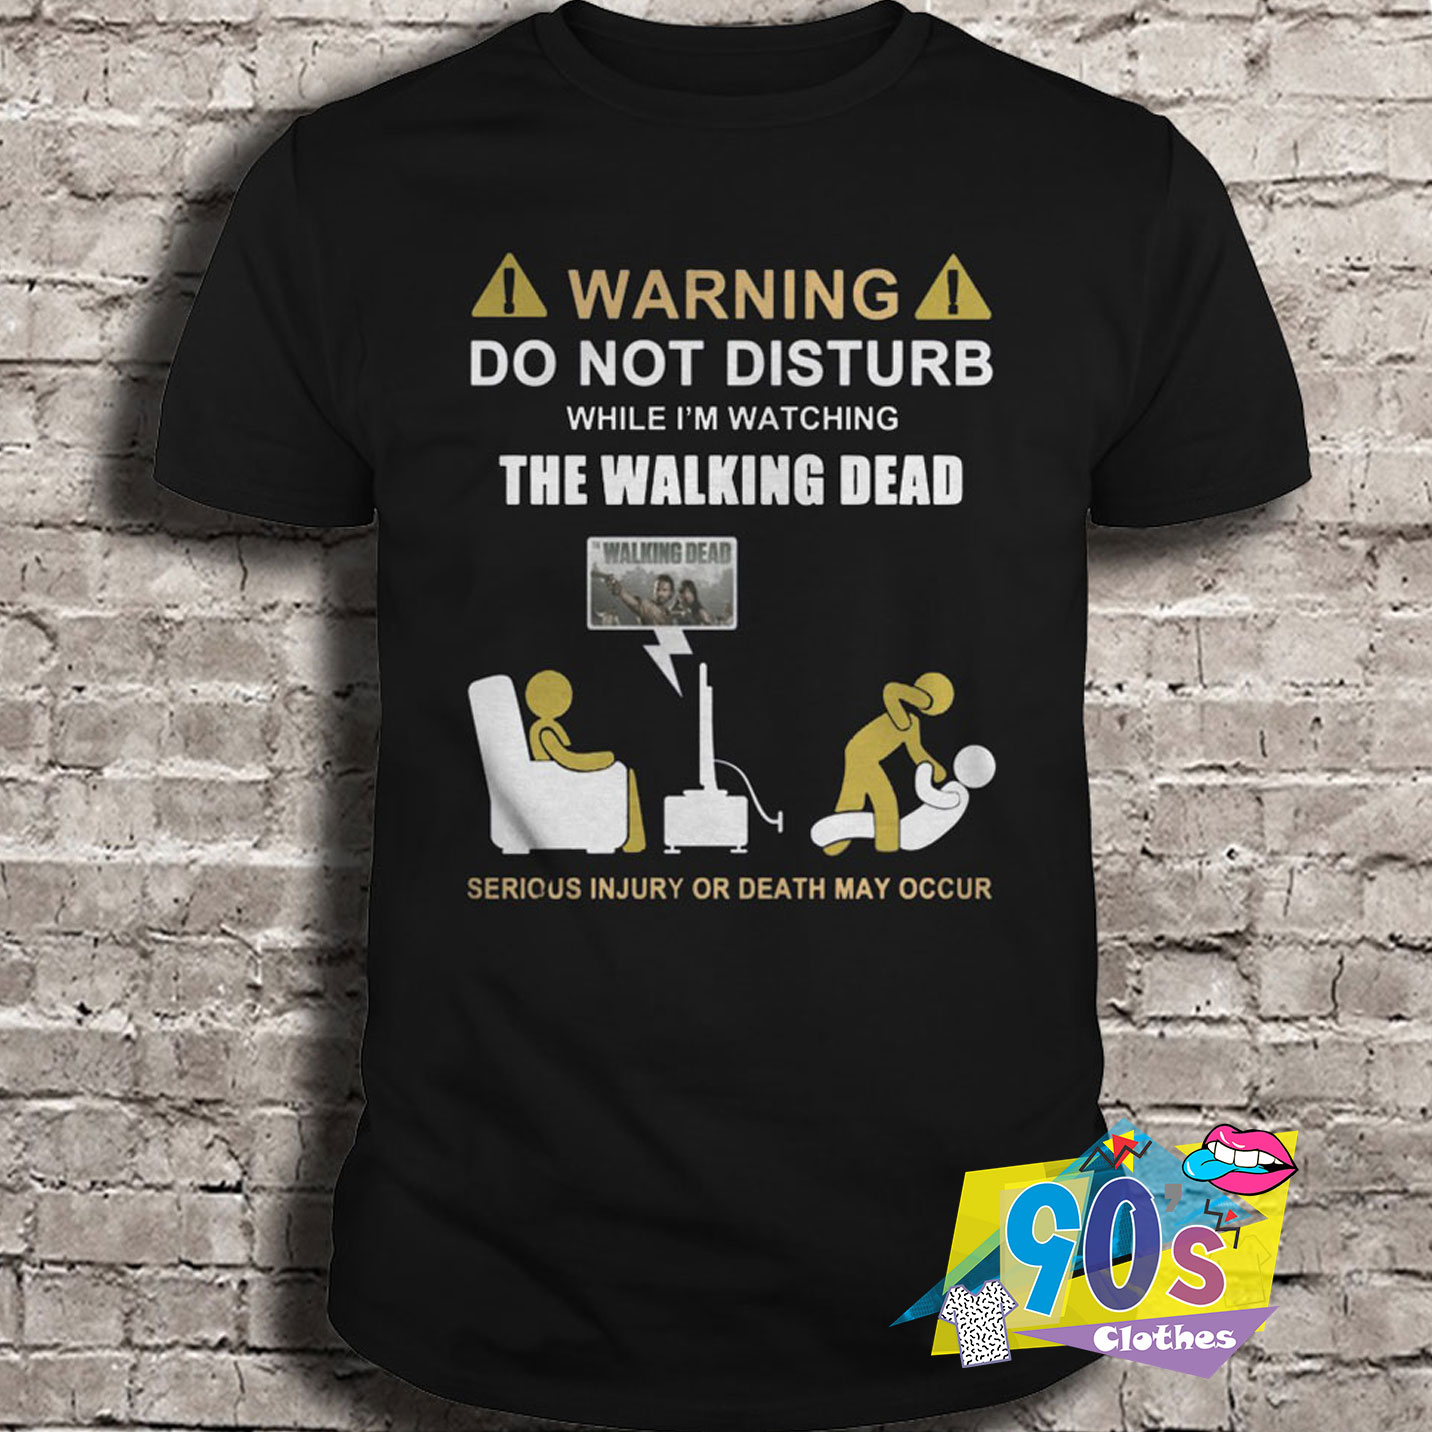 Do Not Disturb While I'm Watching The Walking Dead T Shirt - 90sclothes